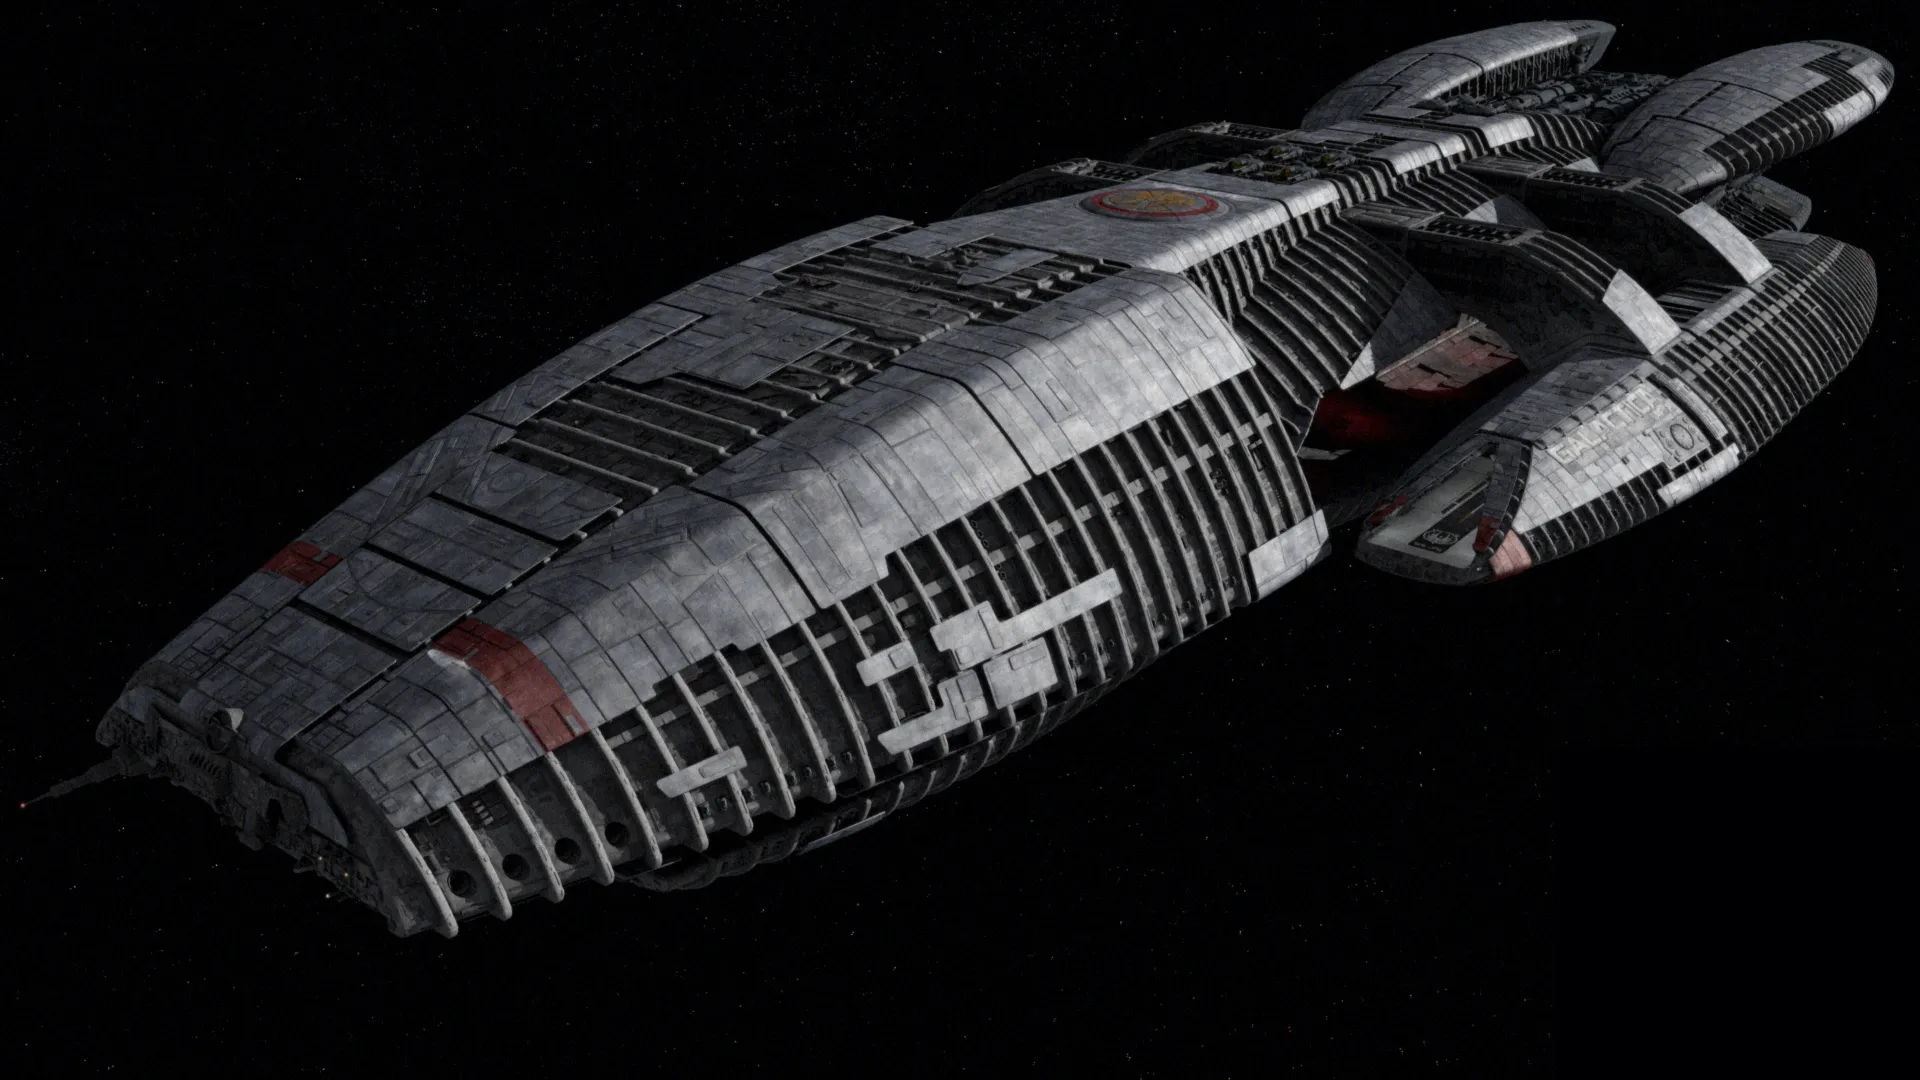 https://www.syfy.com/syfywire/chinese-news-site-posts-battlestar-galactica-real-aircraft-carrier-design Source: Syfy